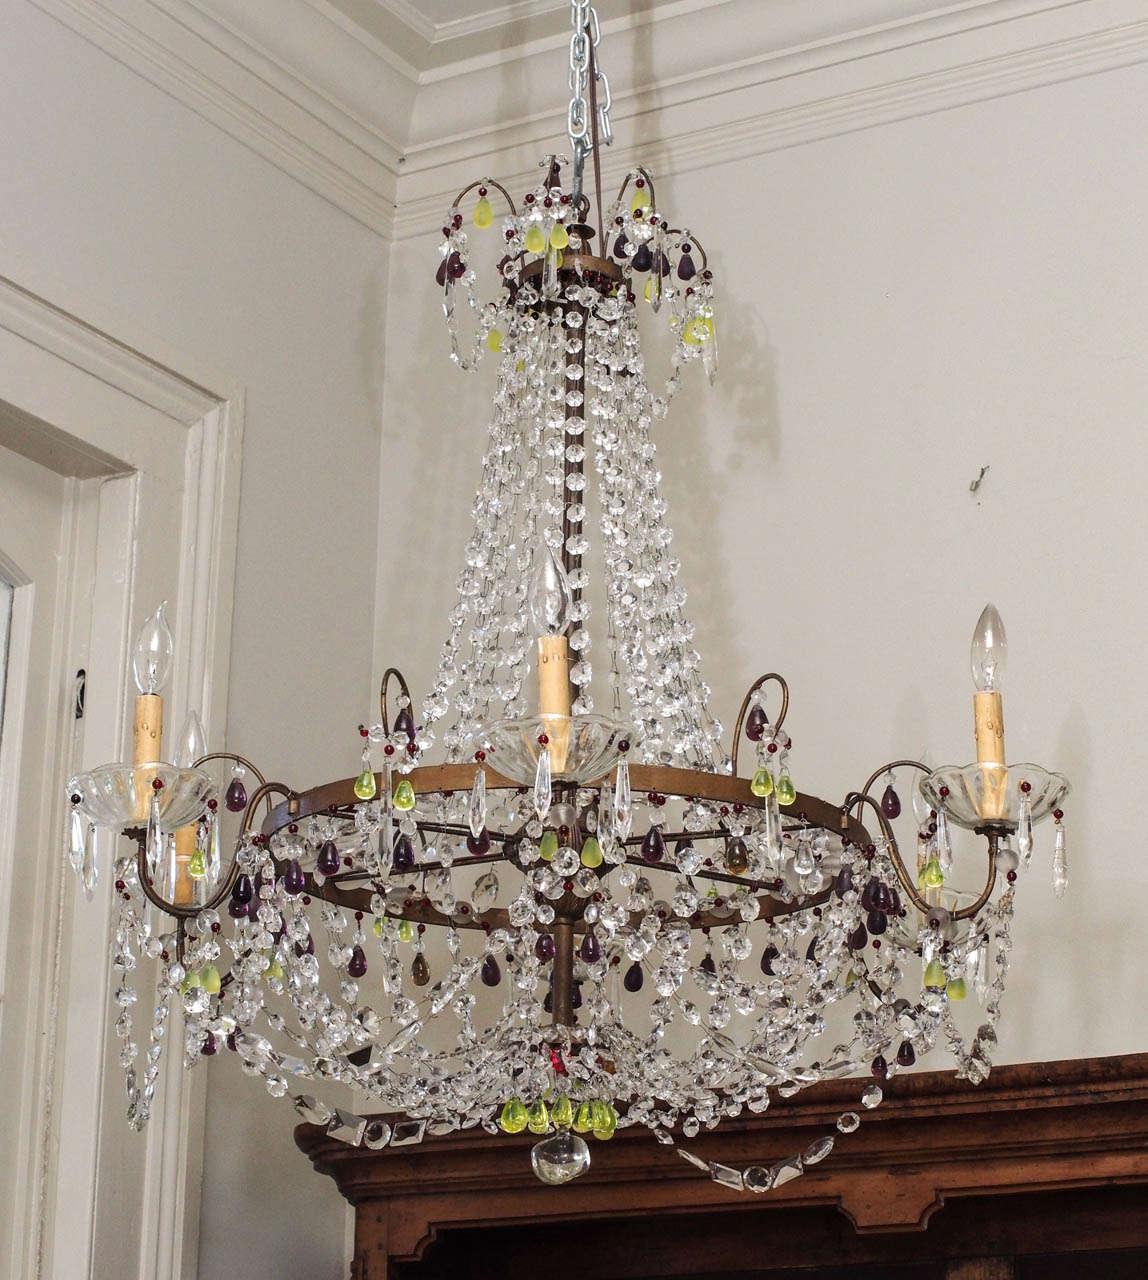 A six light basket form chandelier, the arms sporting three tiers of crystal swags, and overall interspersed with colored beads.  A fresh and elegant interpretation of its 19c. predecessor.